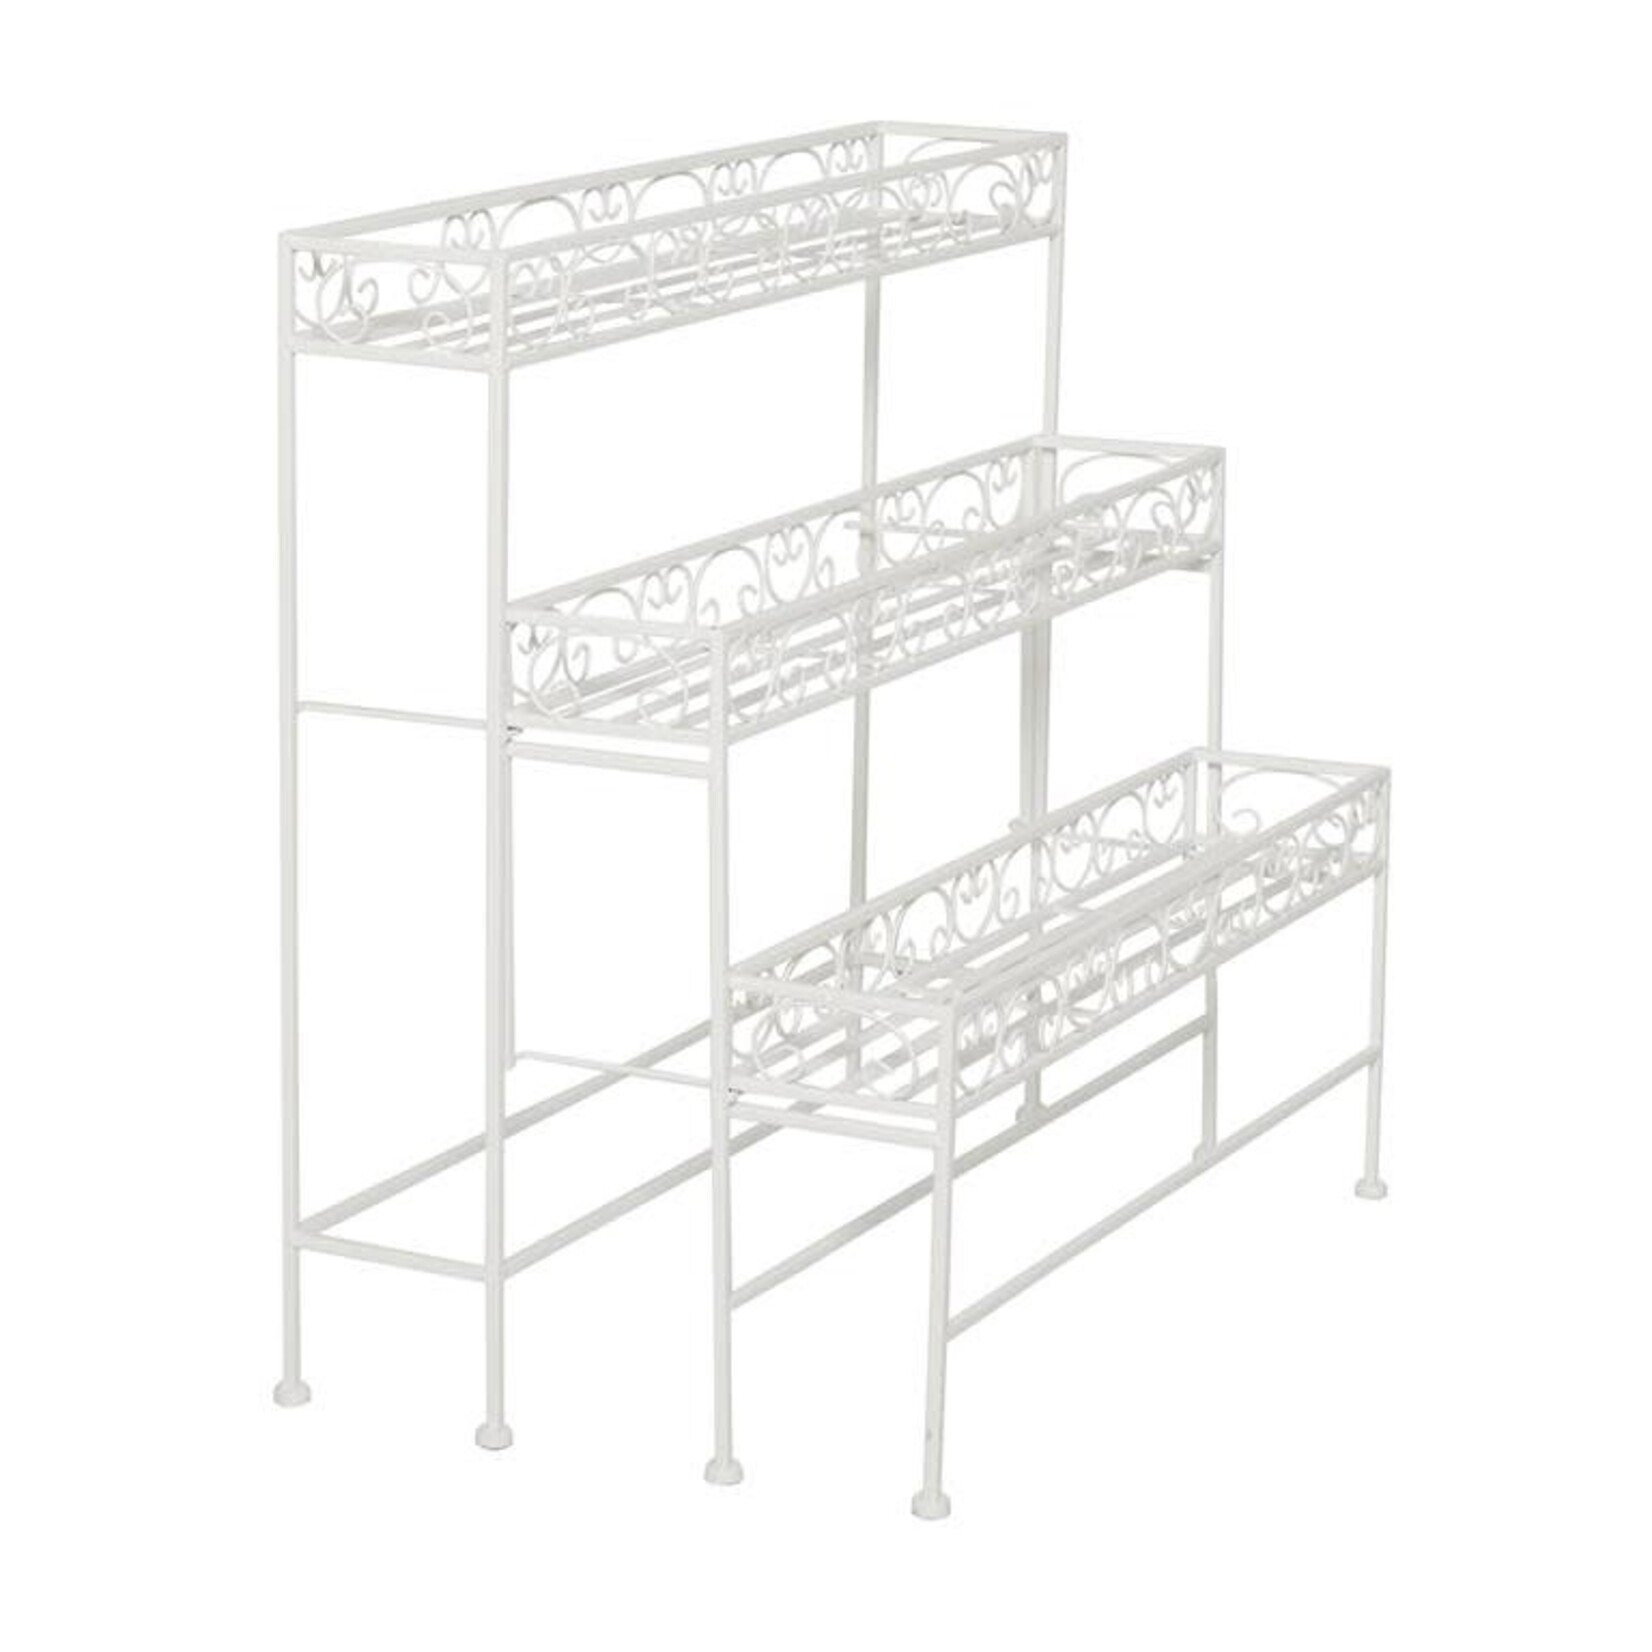 50% OFF WAS $210 NOW $105.00, 30”H X 28”W WHITE THREE LAYER METAL PLANT STAND